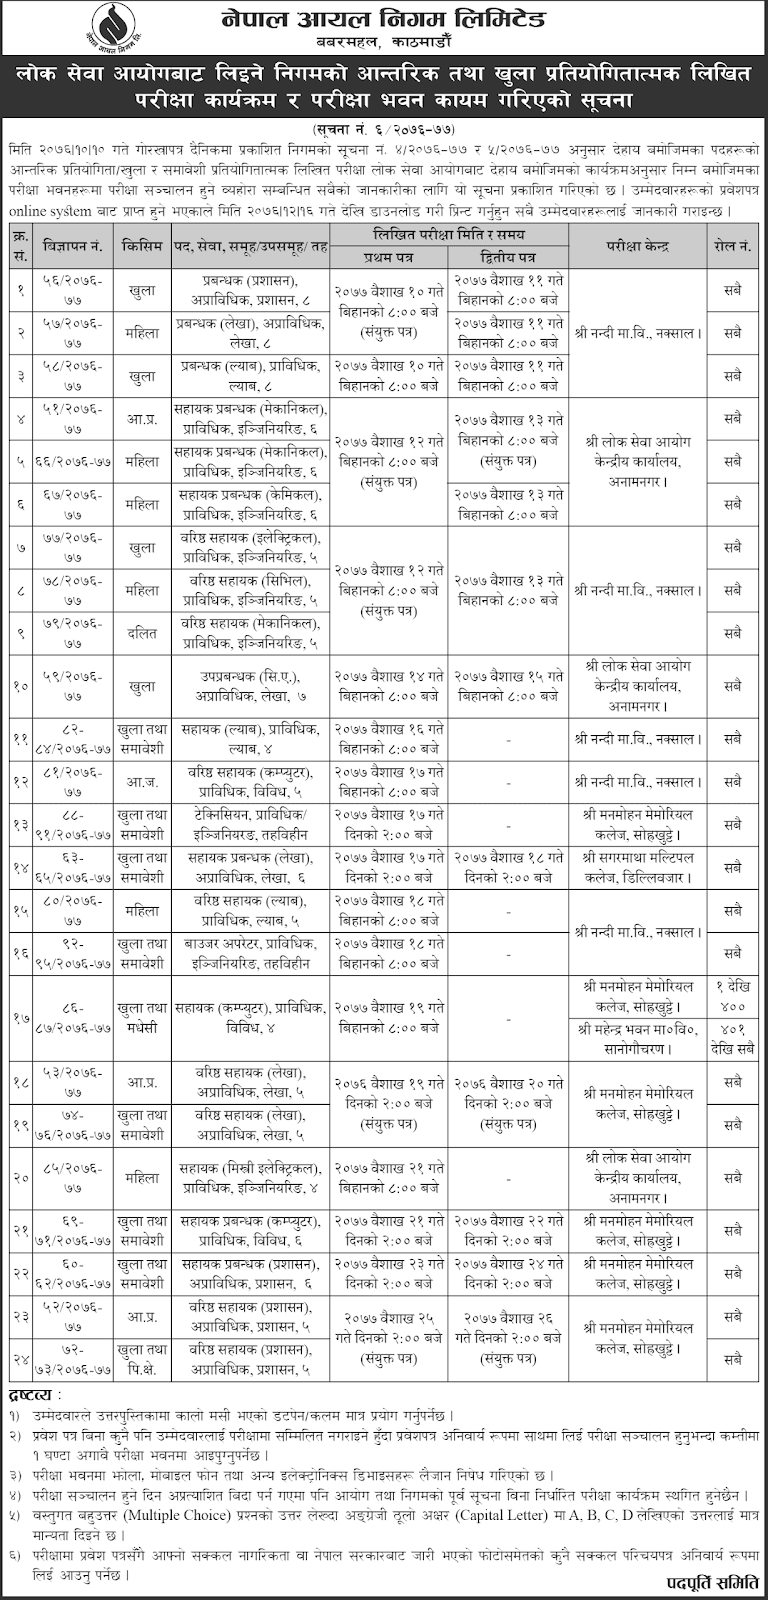 Nepal Oil Corporation Written Exam Routine and Center